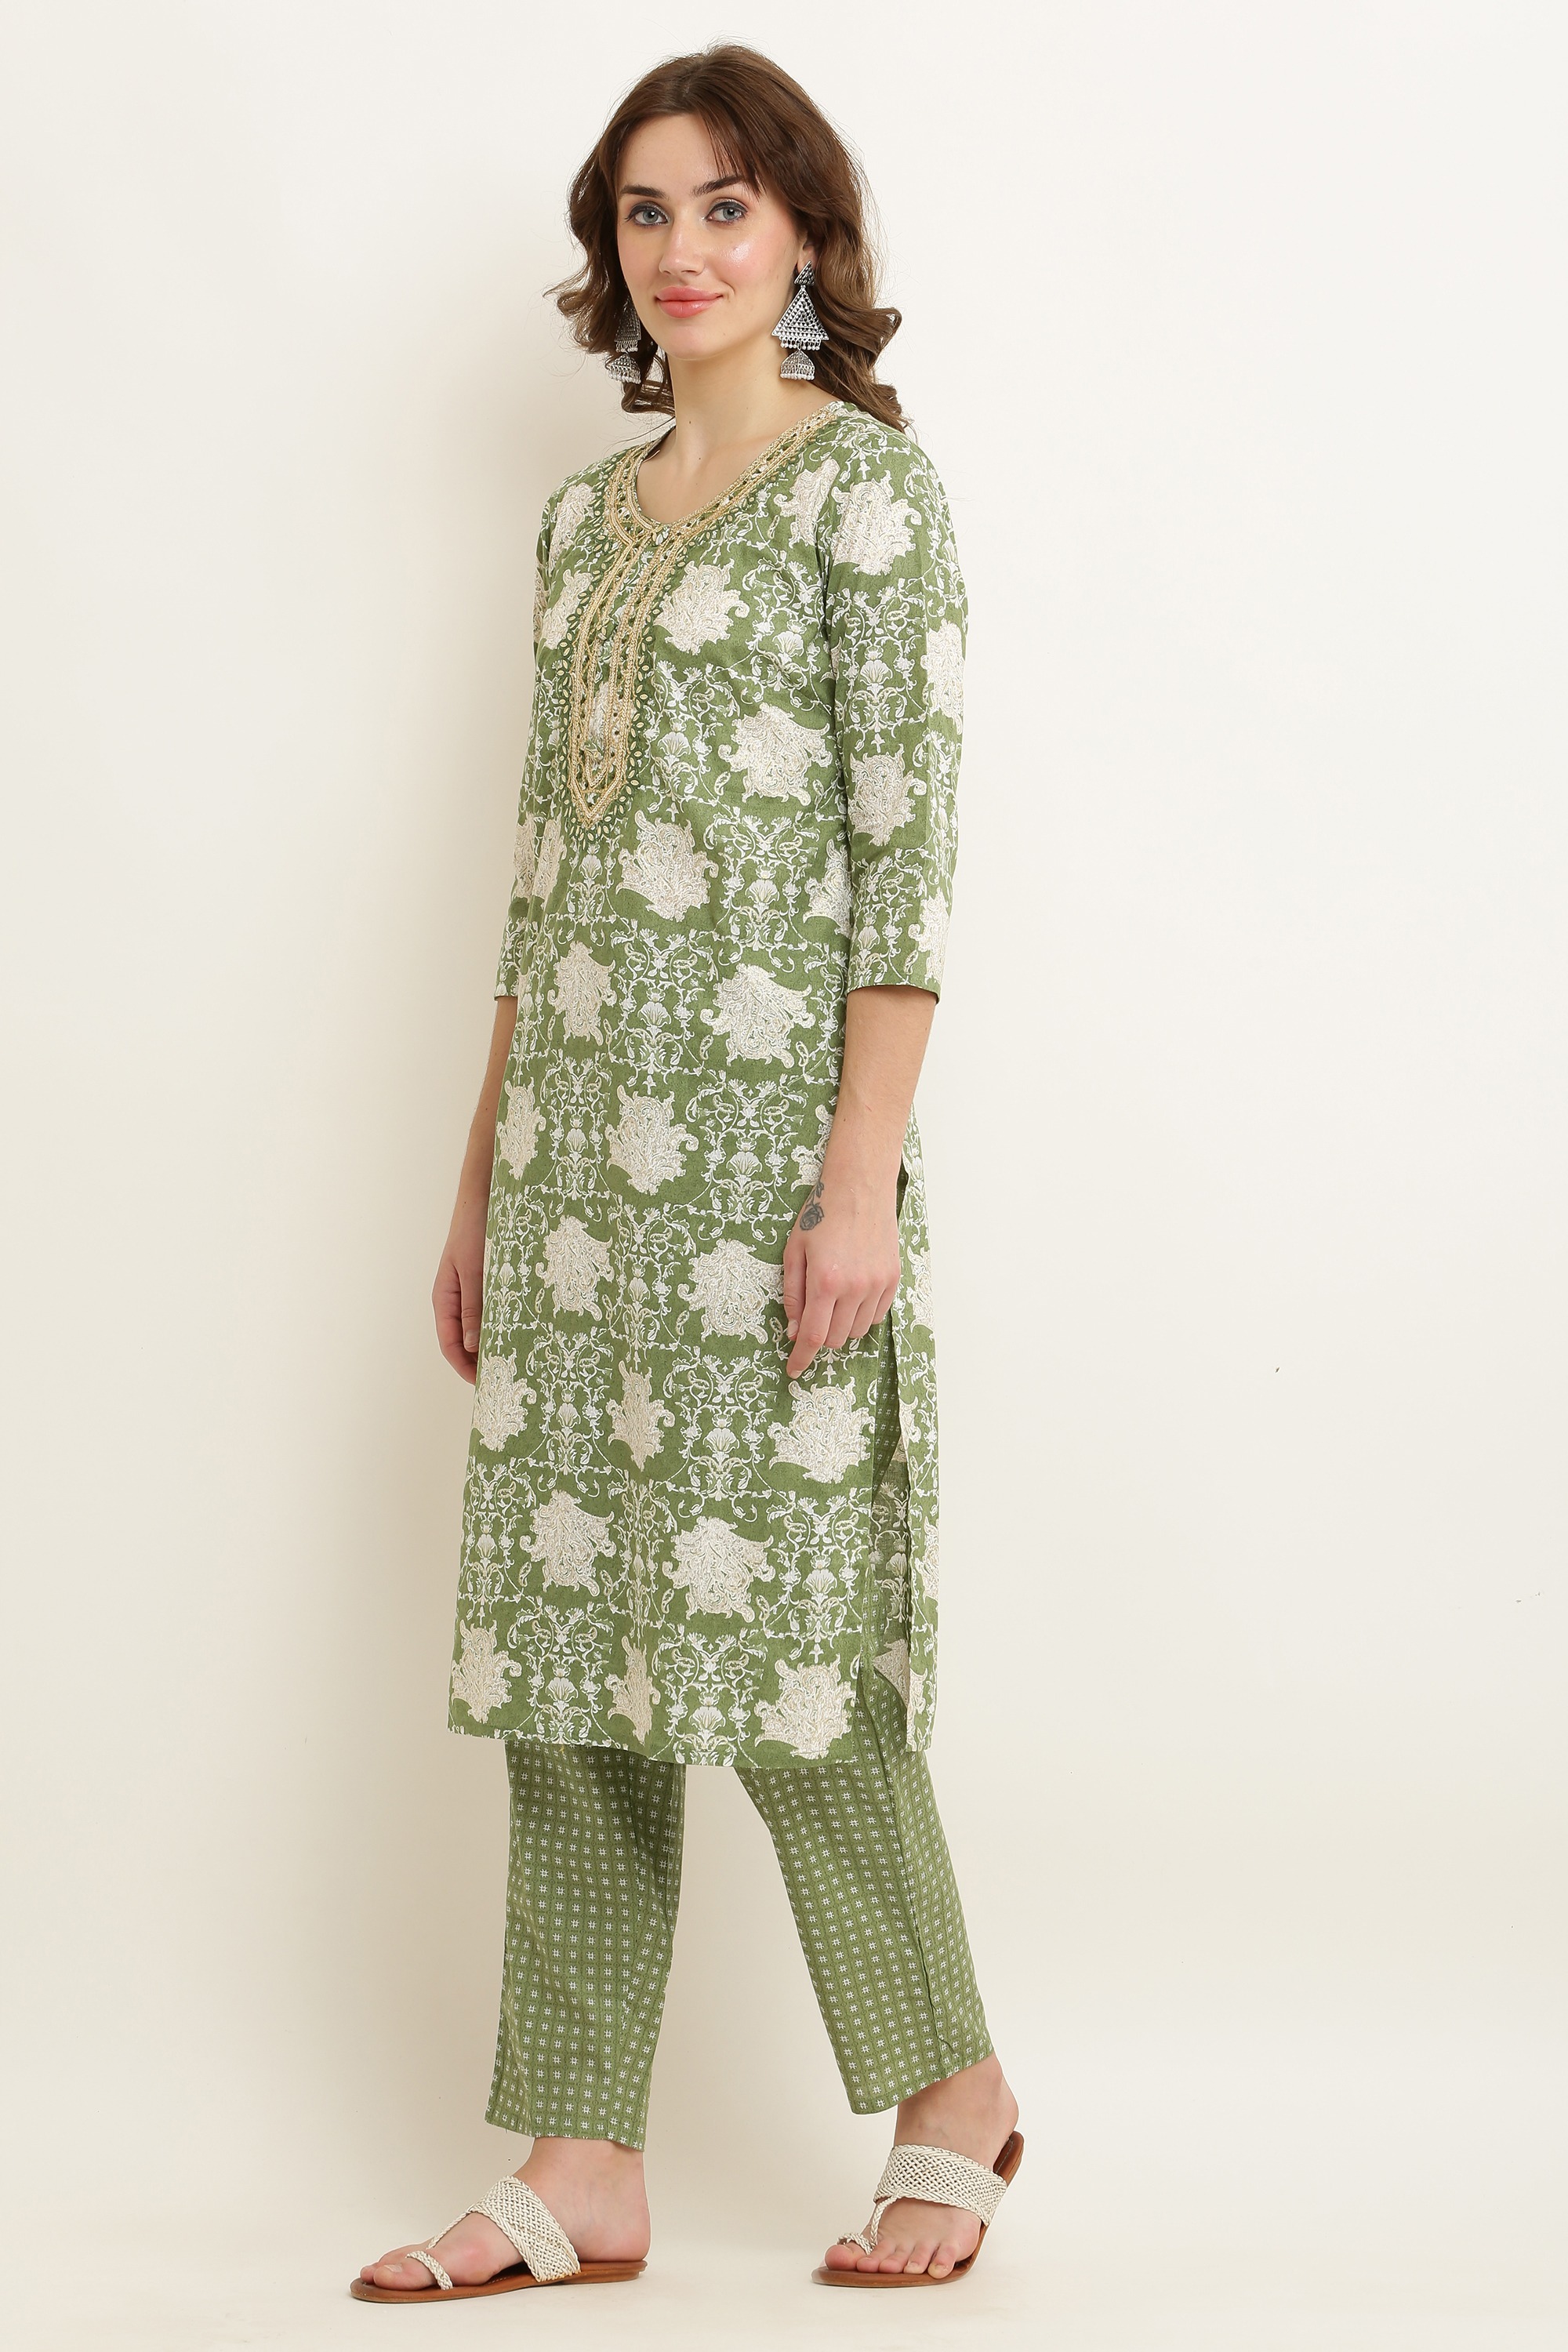 Rayon designer Kurti Pants dress for an ethnic look in summers - Shop  online women fashion, indo-western, ethnic wear, sari, suits, kurtis,  watches, gifts.